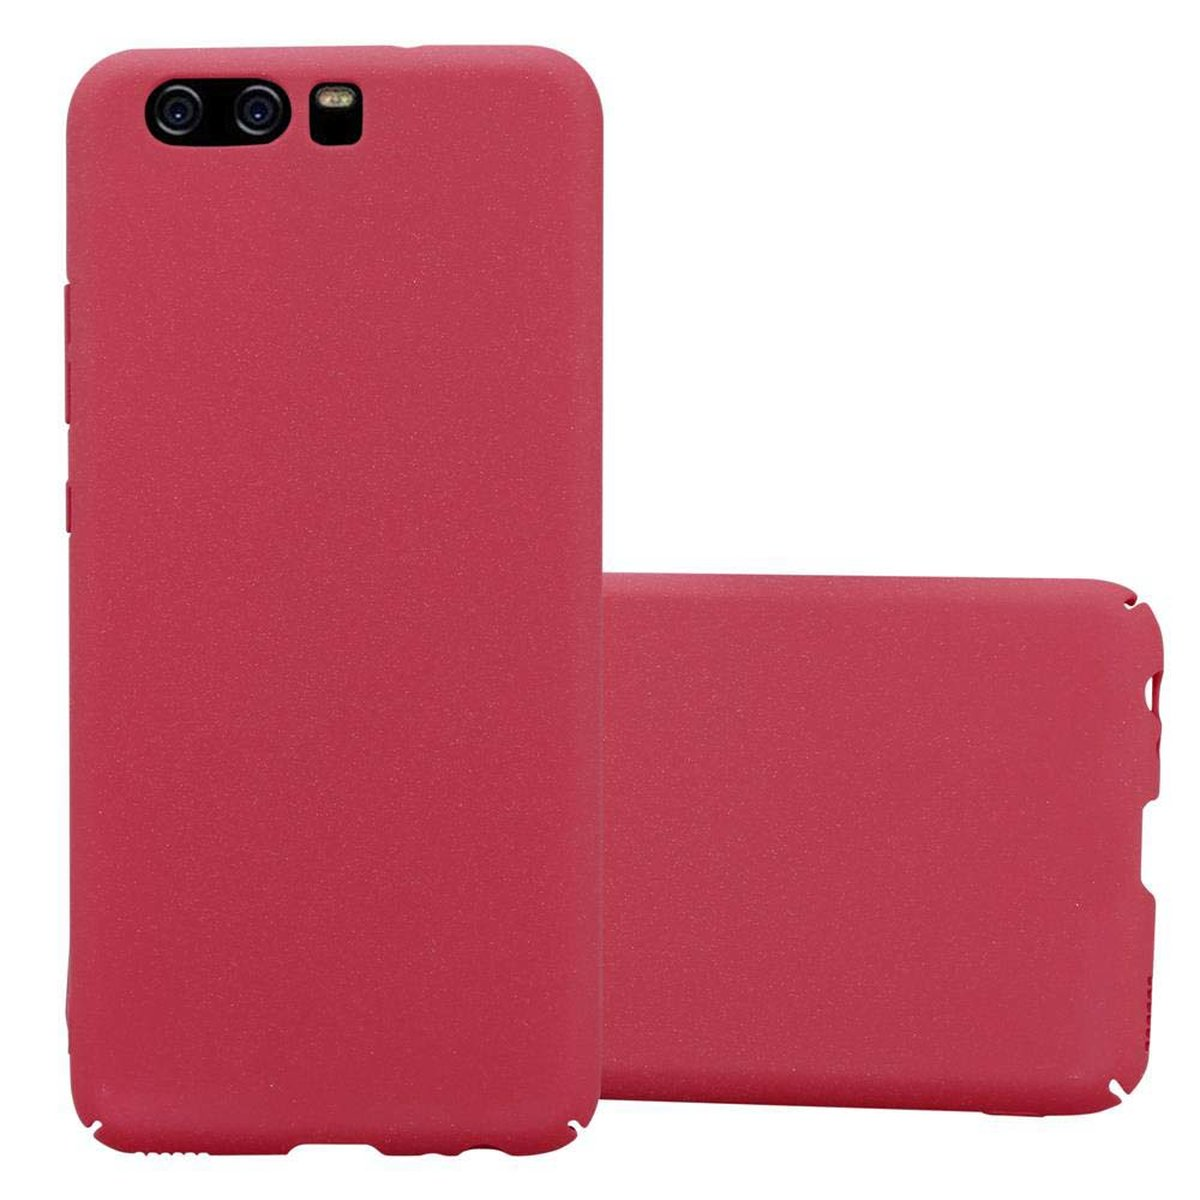 P10, Case Huawei, Hülle Frosty im Style, Backcover, Hard FROSTY CADORABO ROT